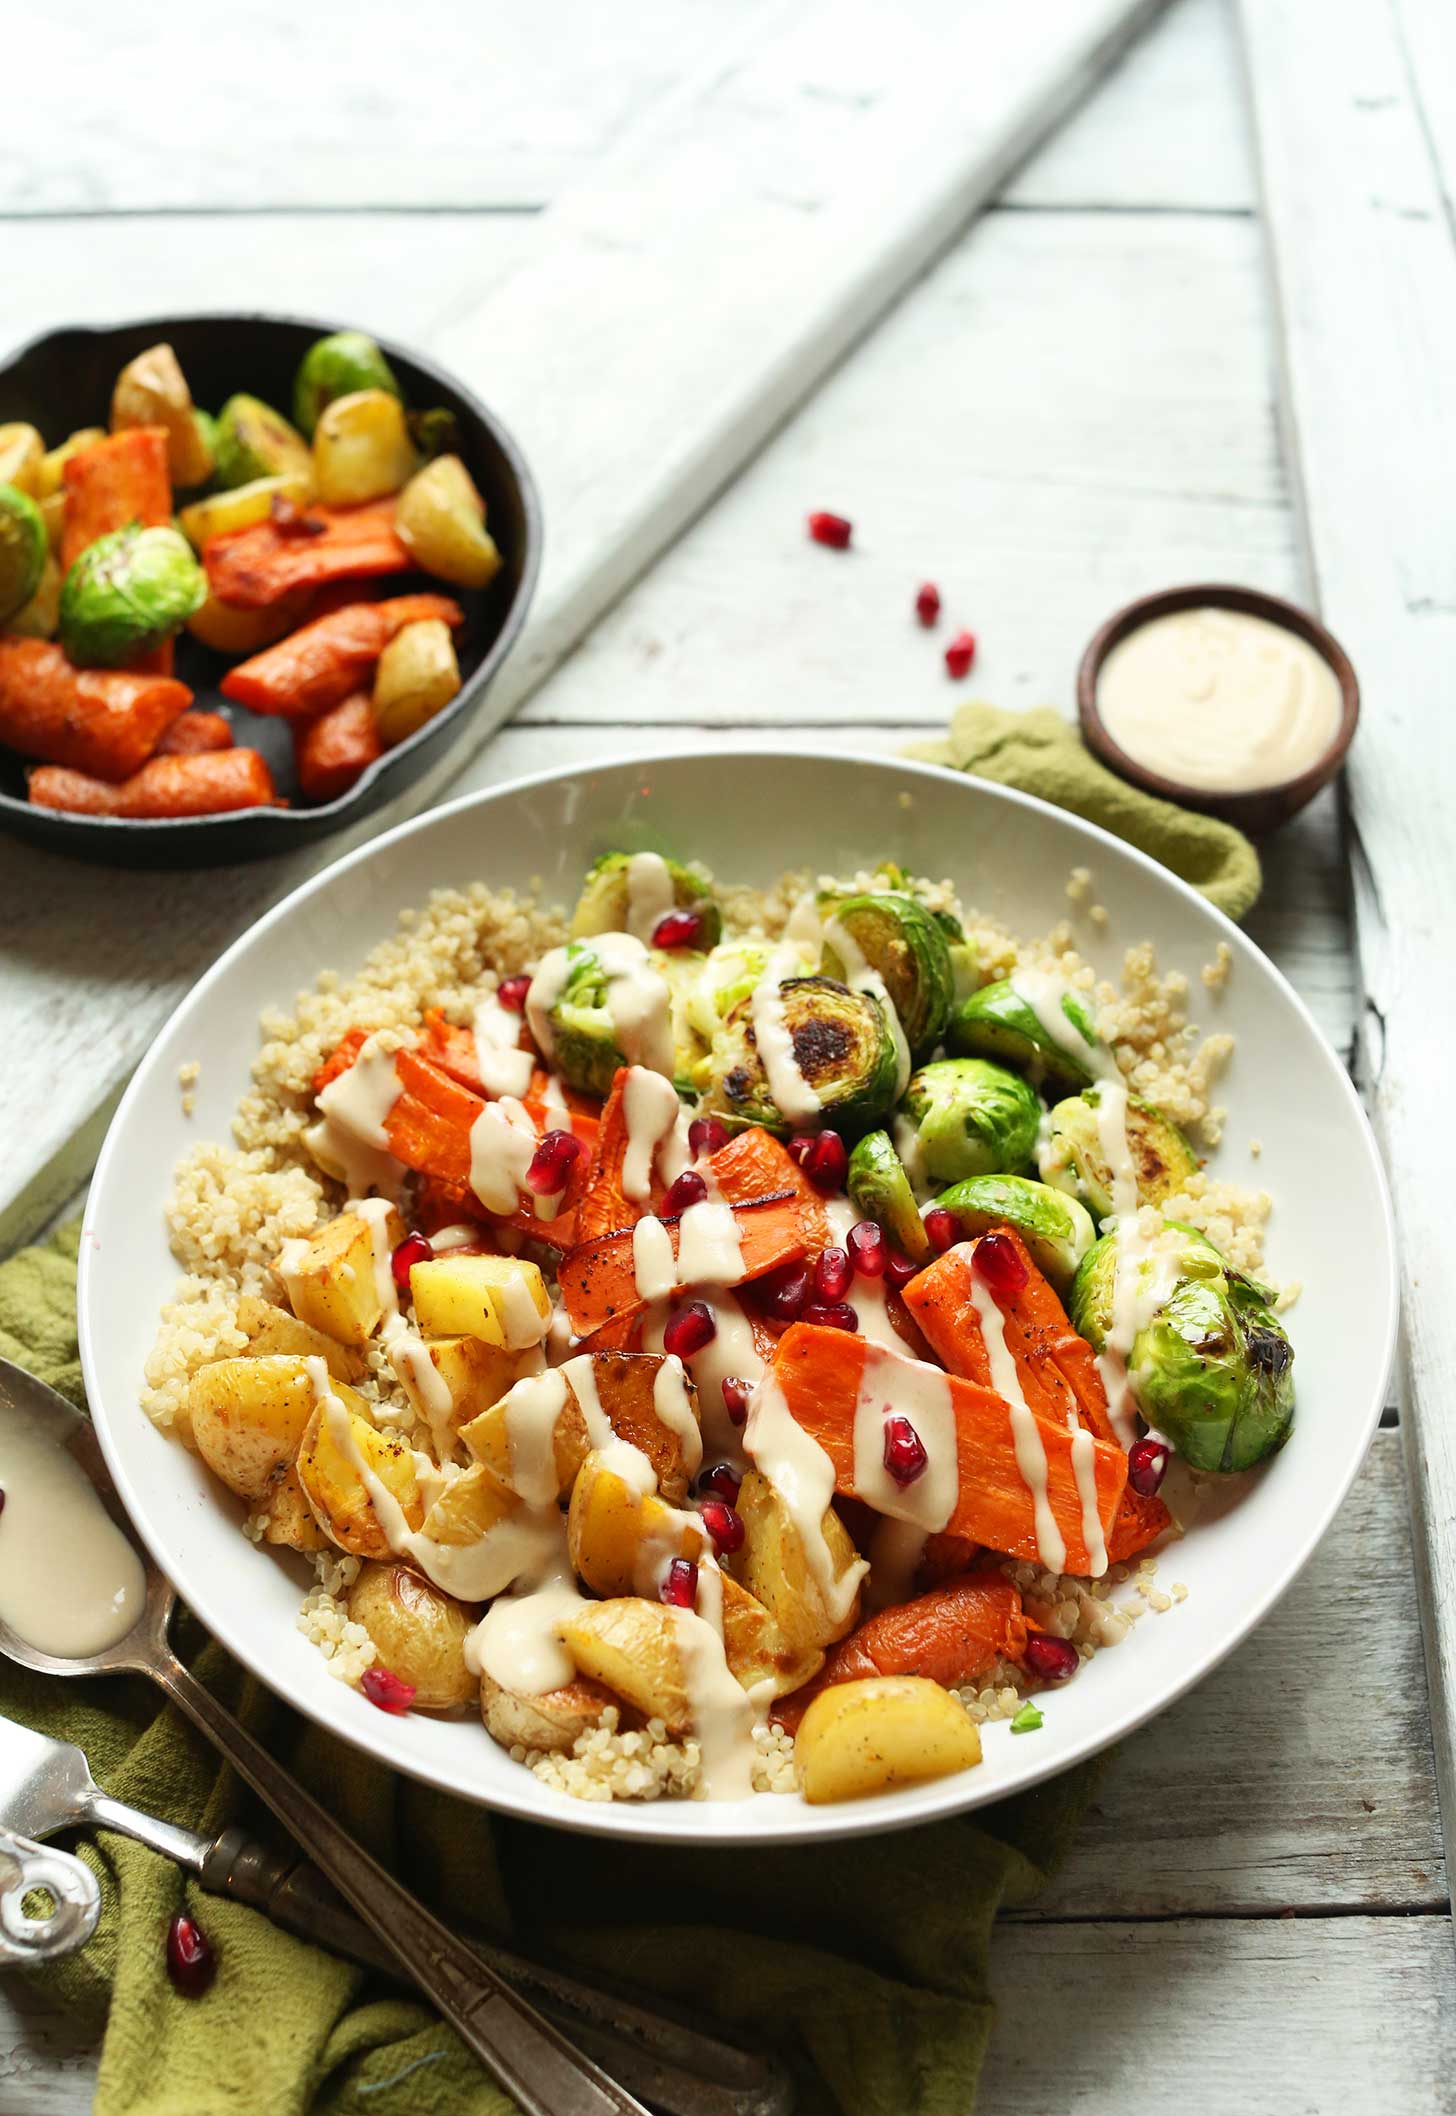 AMAZING 30-minute Roasted Vegetable and Quinoa HARVEST BOWLS! Hearty, wholesome, and SO satisfying! #vegan #glutenfree #recipe #easy #healthy #dinner